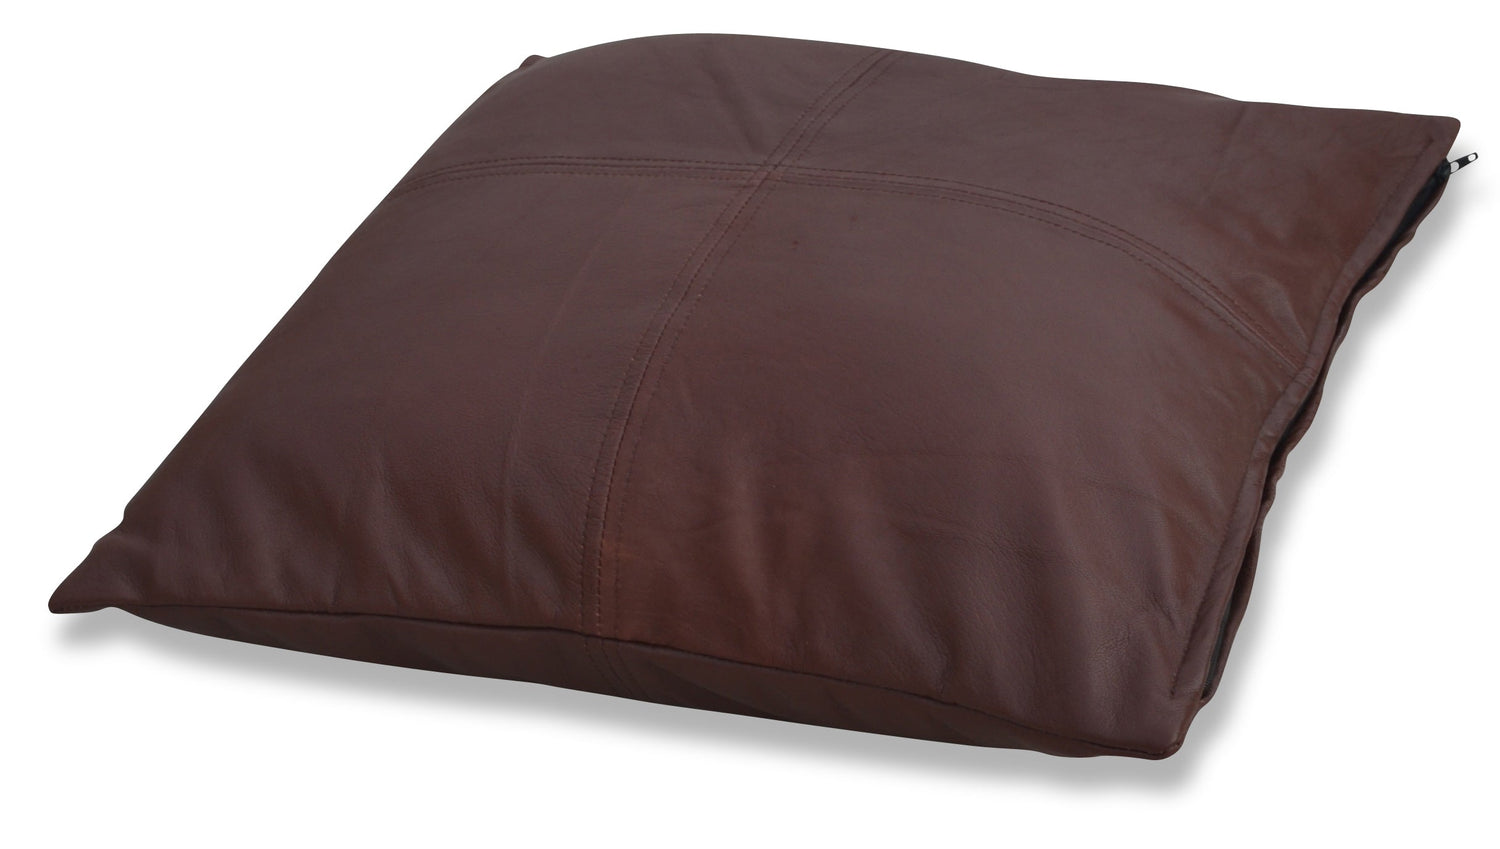 Brown Soft Lamb Leather Comfort Pillow Cushion Cover - SouthBeachLeather